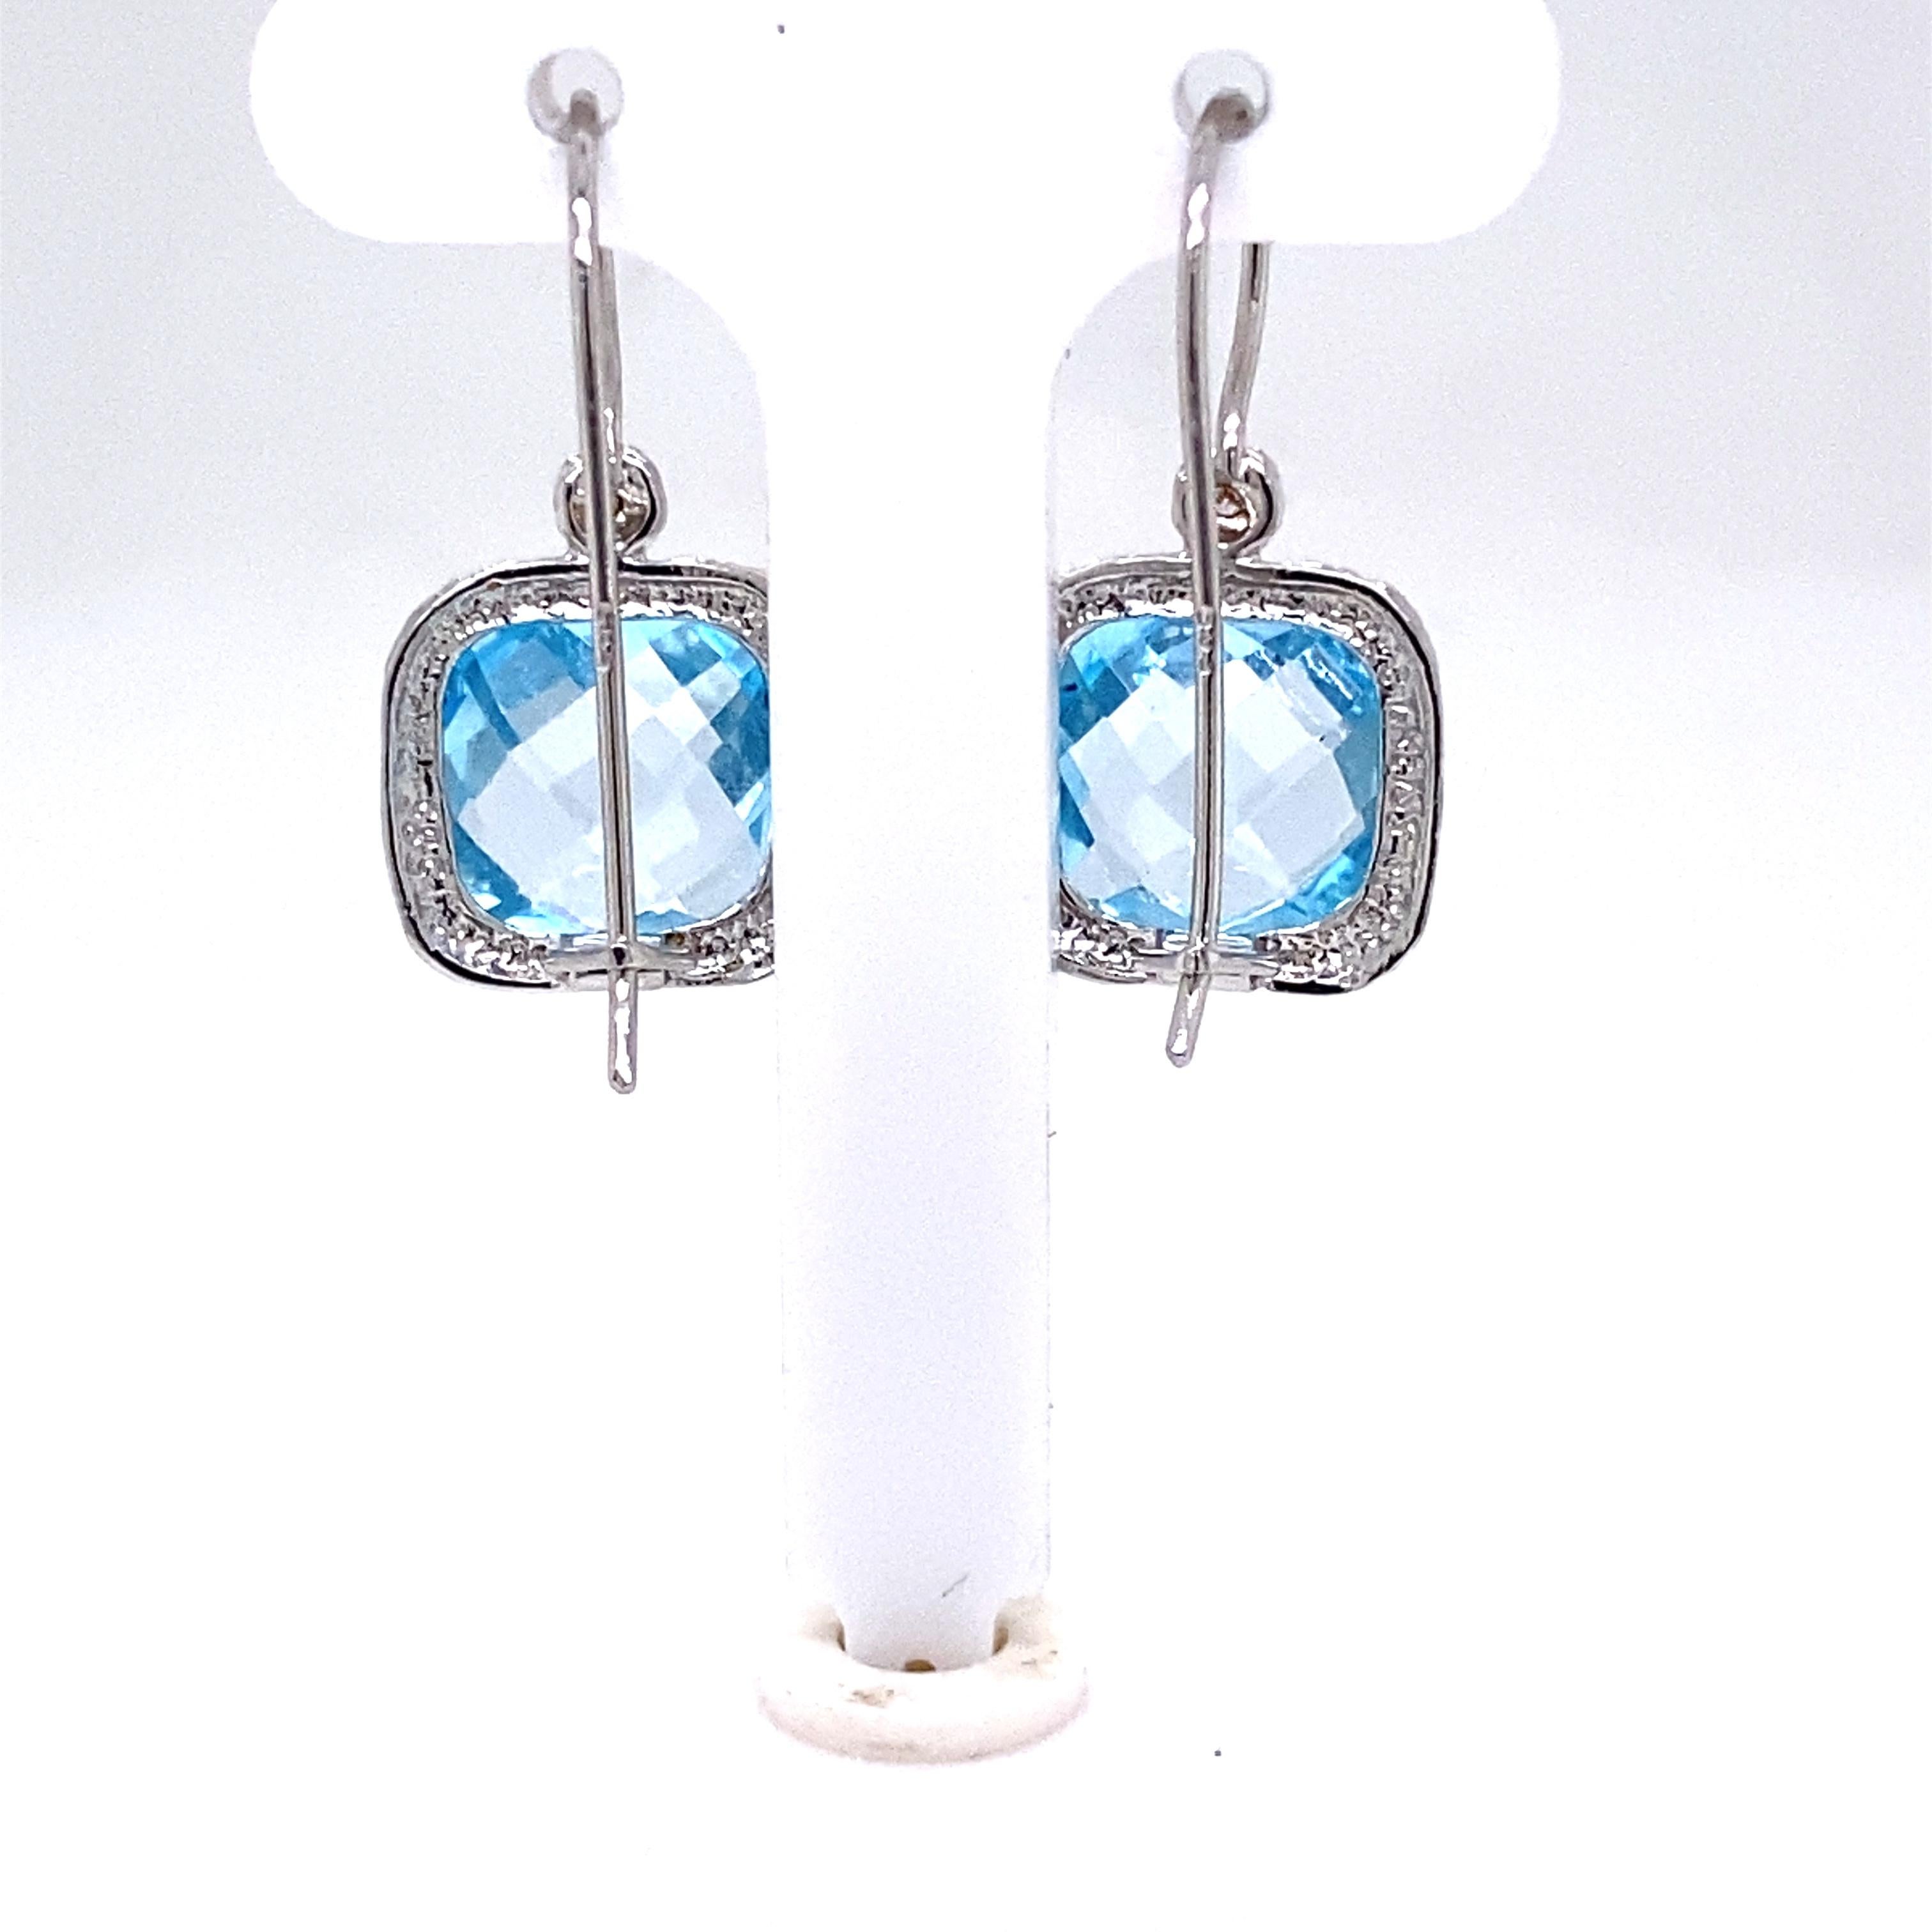 14 Karat White Gold Hand-Crafted Polish-Finished 10mm Checkerboard-Cut Cushion-Shaped Blue Topaz Semi-Precious Color Stone Drop Earrings, Accented with 0.04 Carats of Bezel Set Diamonds.
